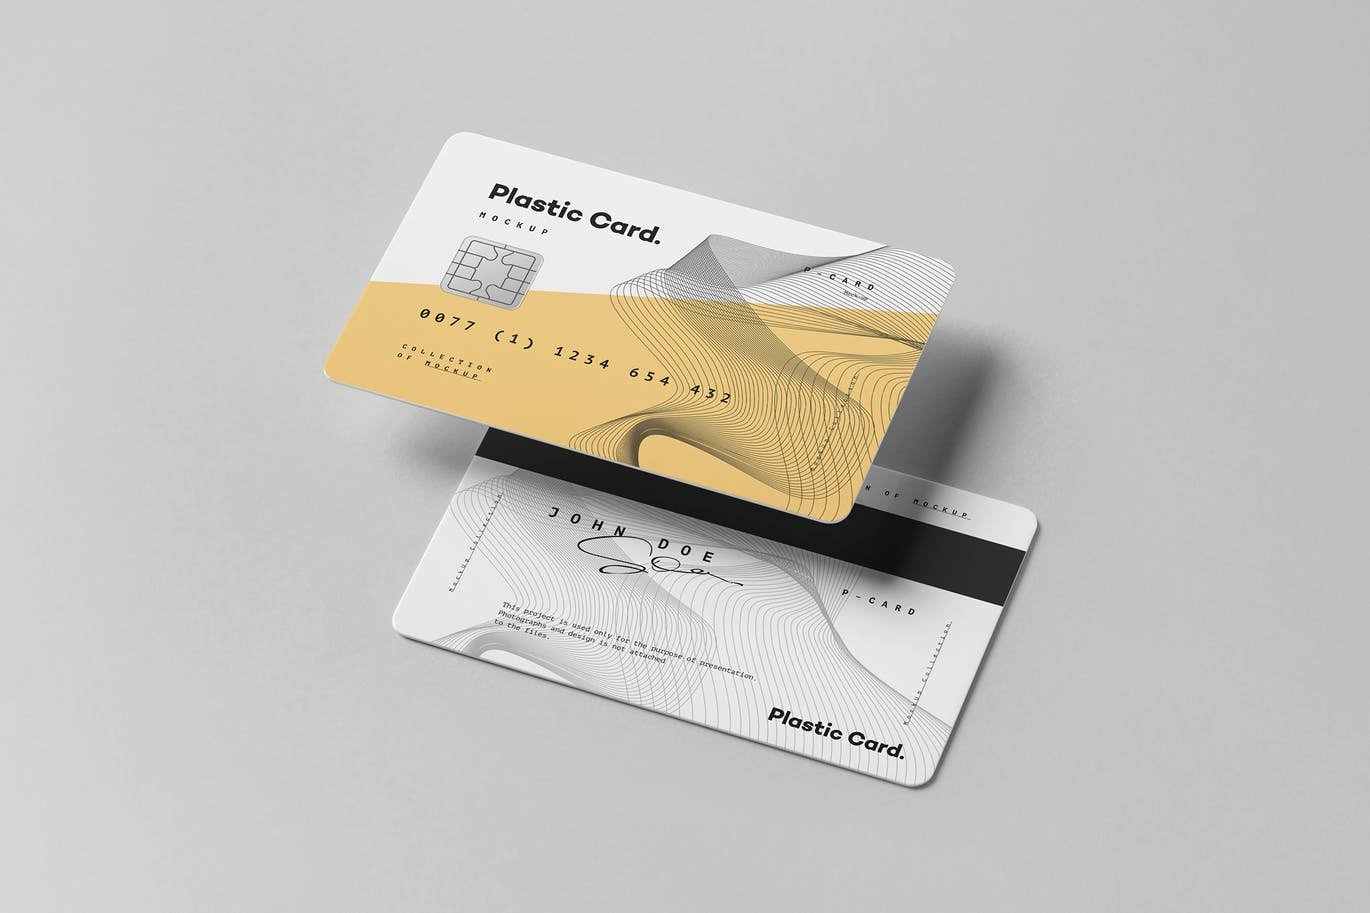 Credit Card Mockup Psd Awesome 40 Excellent Credit Card Psd Mockup Templates